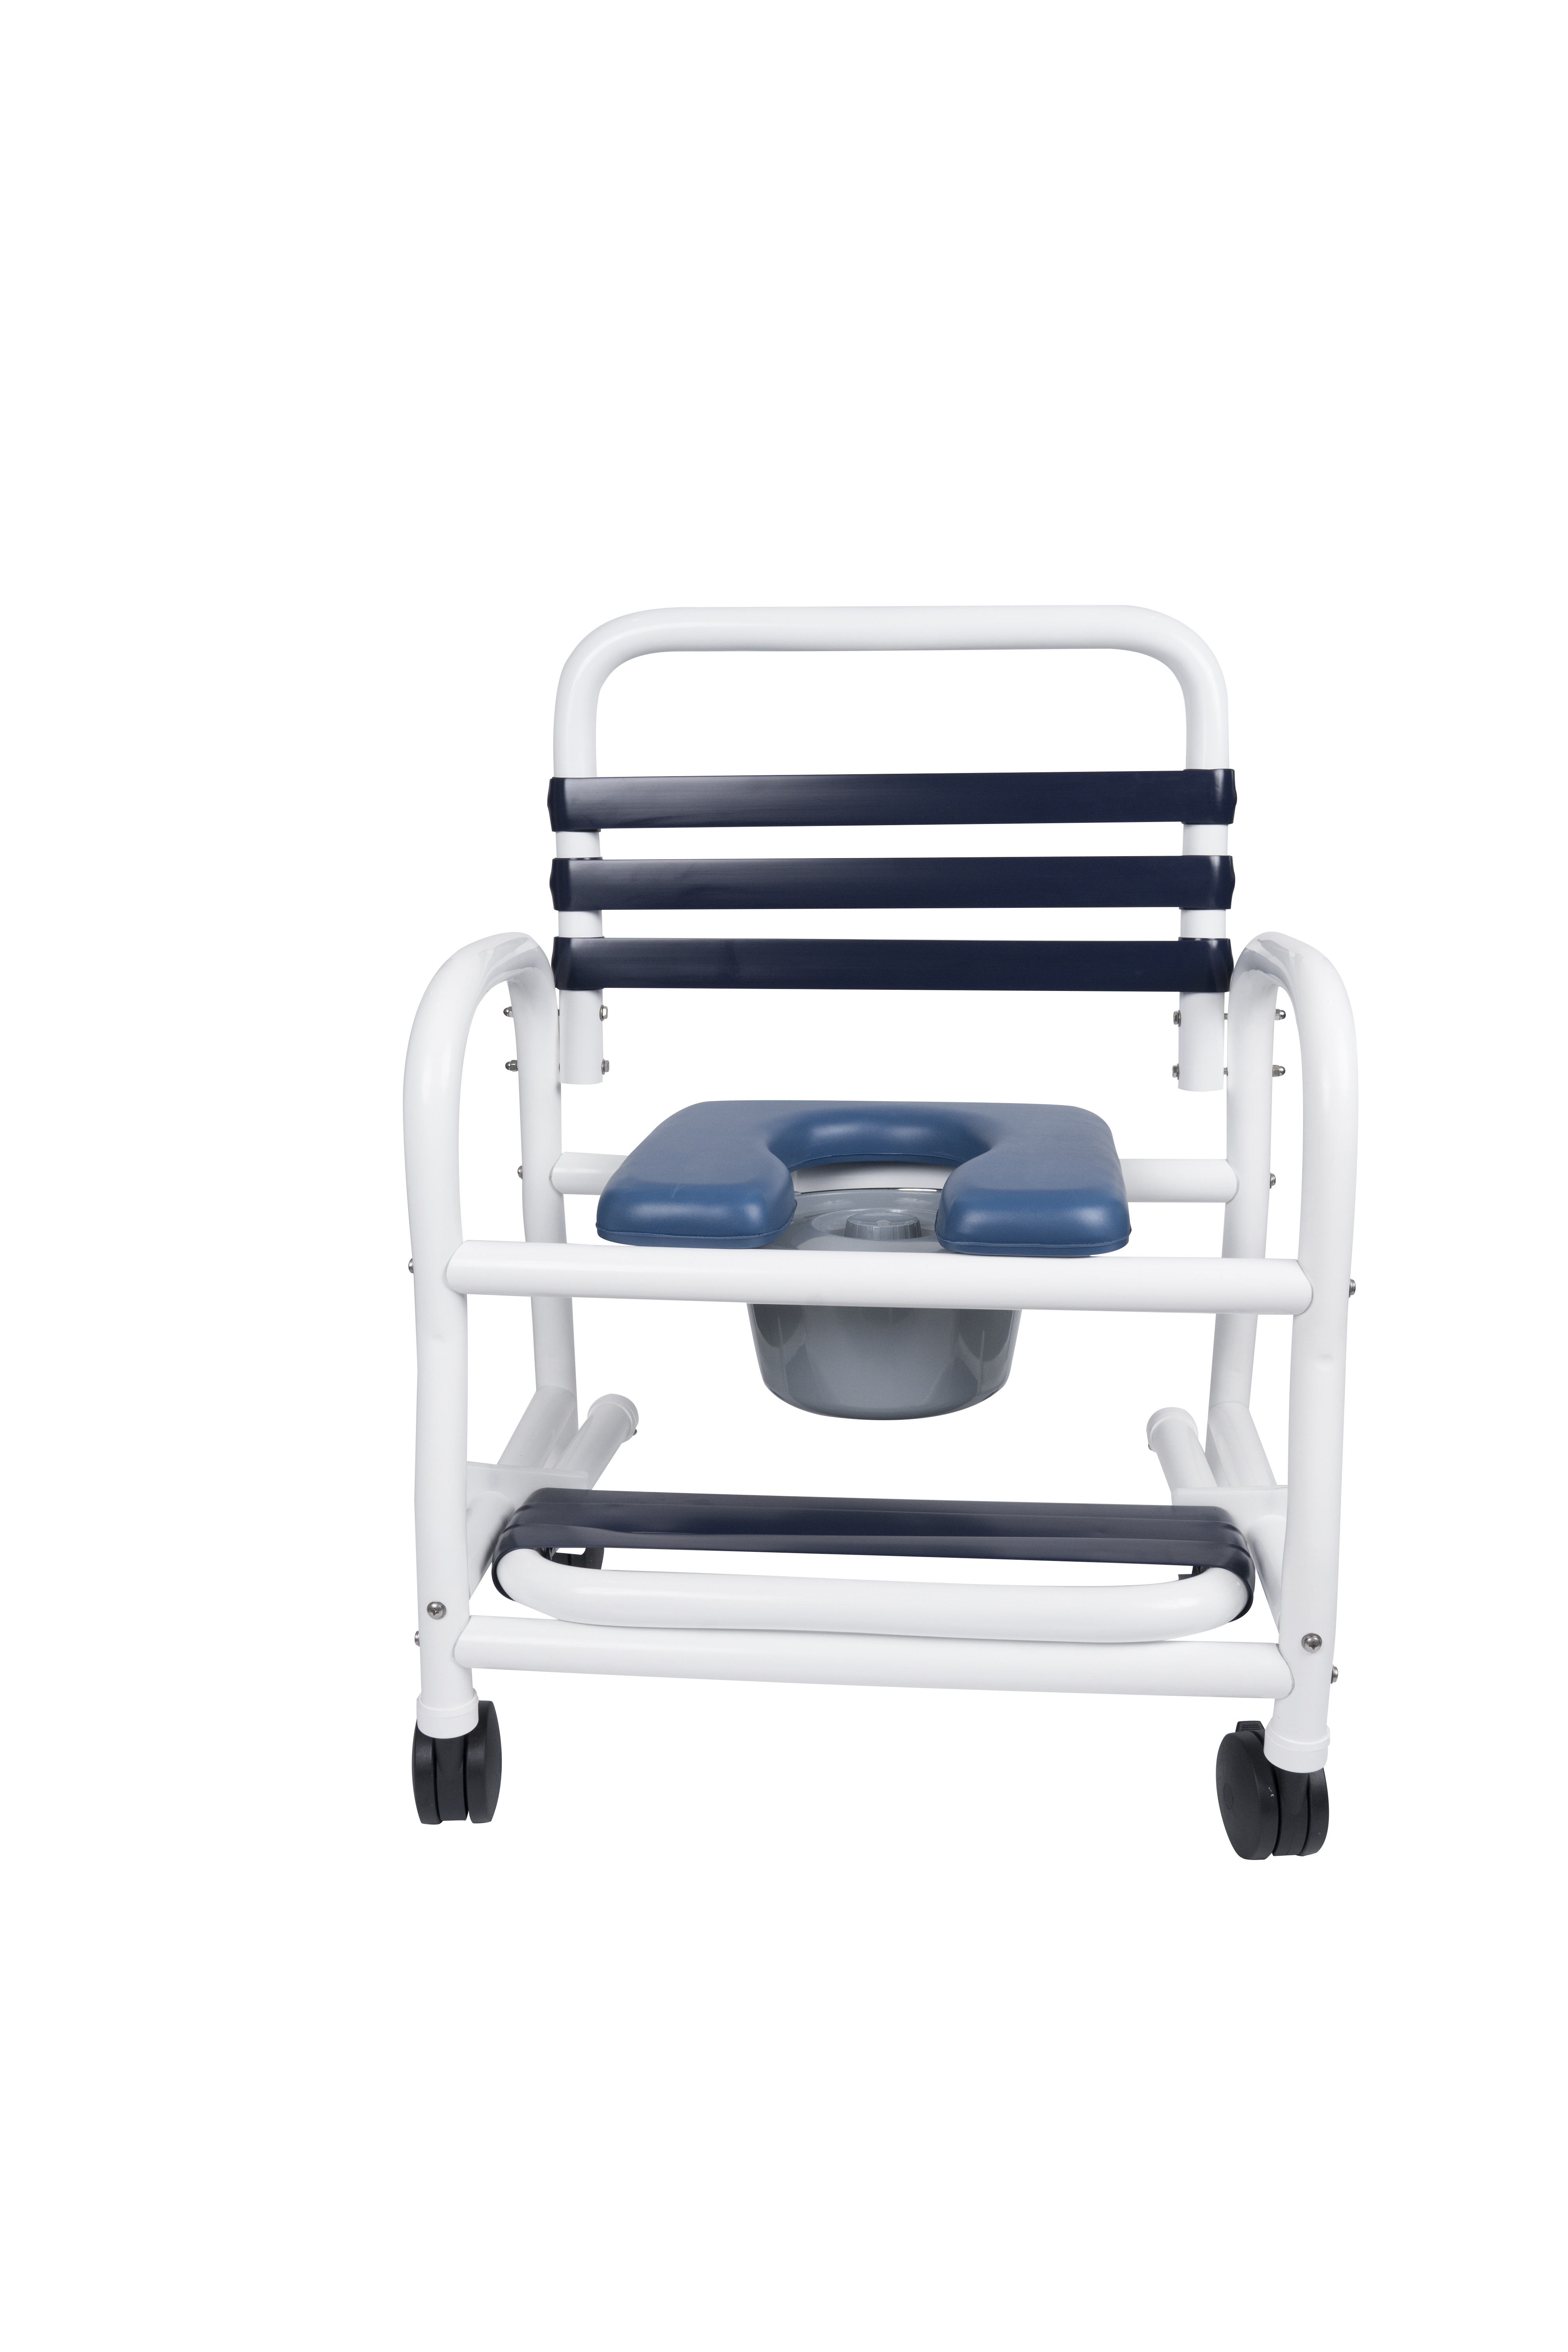 Picture of Infection Control Design DNE-126-4TWL-NC-SF 26 in. Deluxe New Era Infection Control Shower Chair, 4 in. Twin Size - 25 x 10 x 21 in.